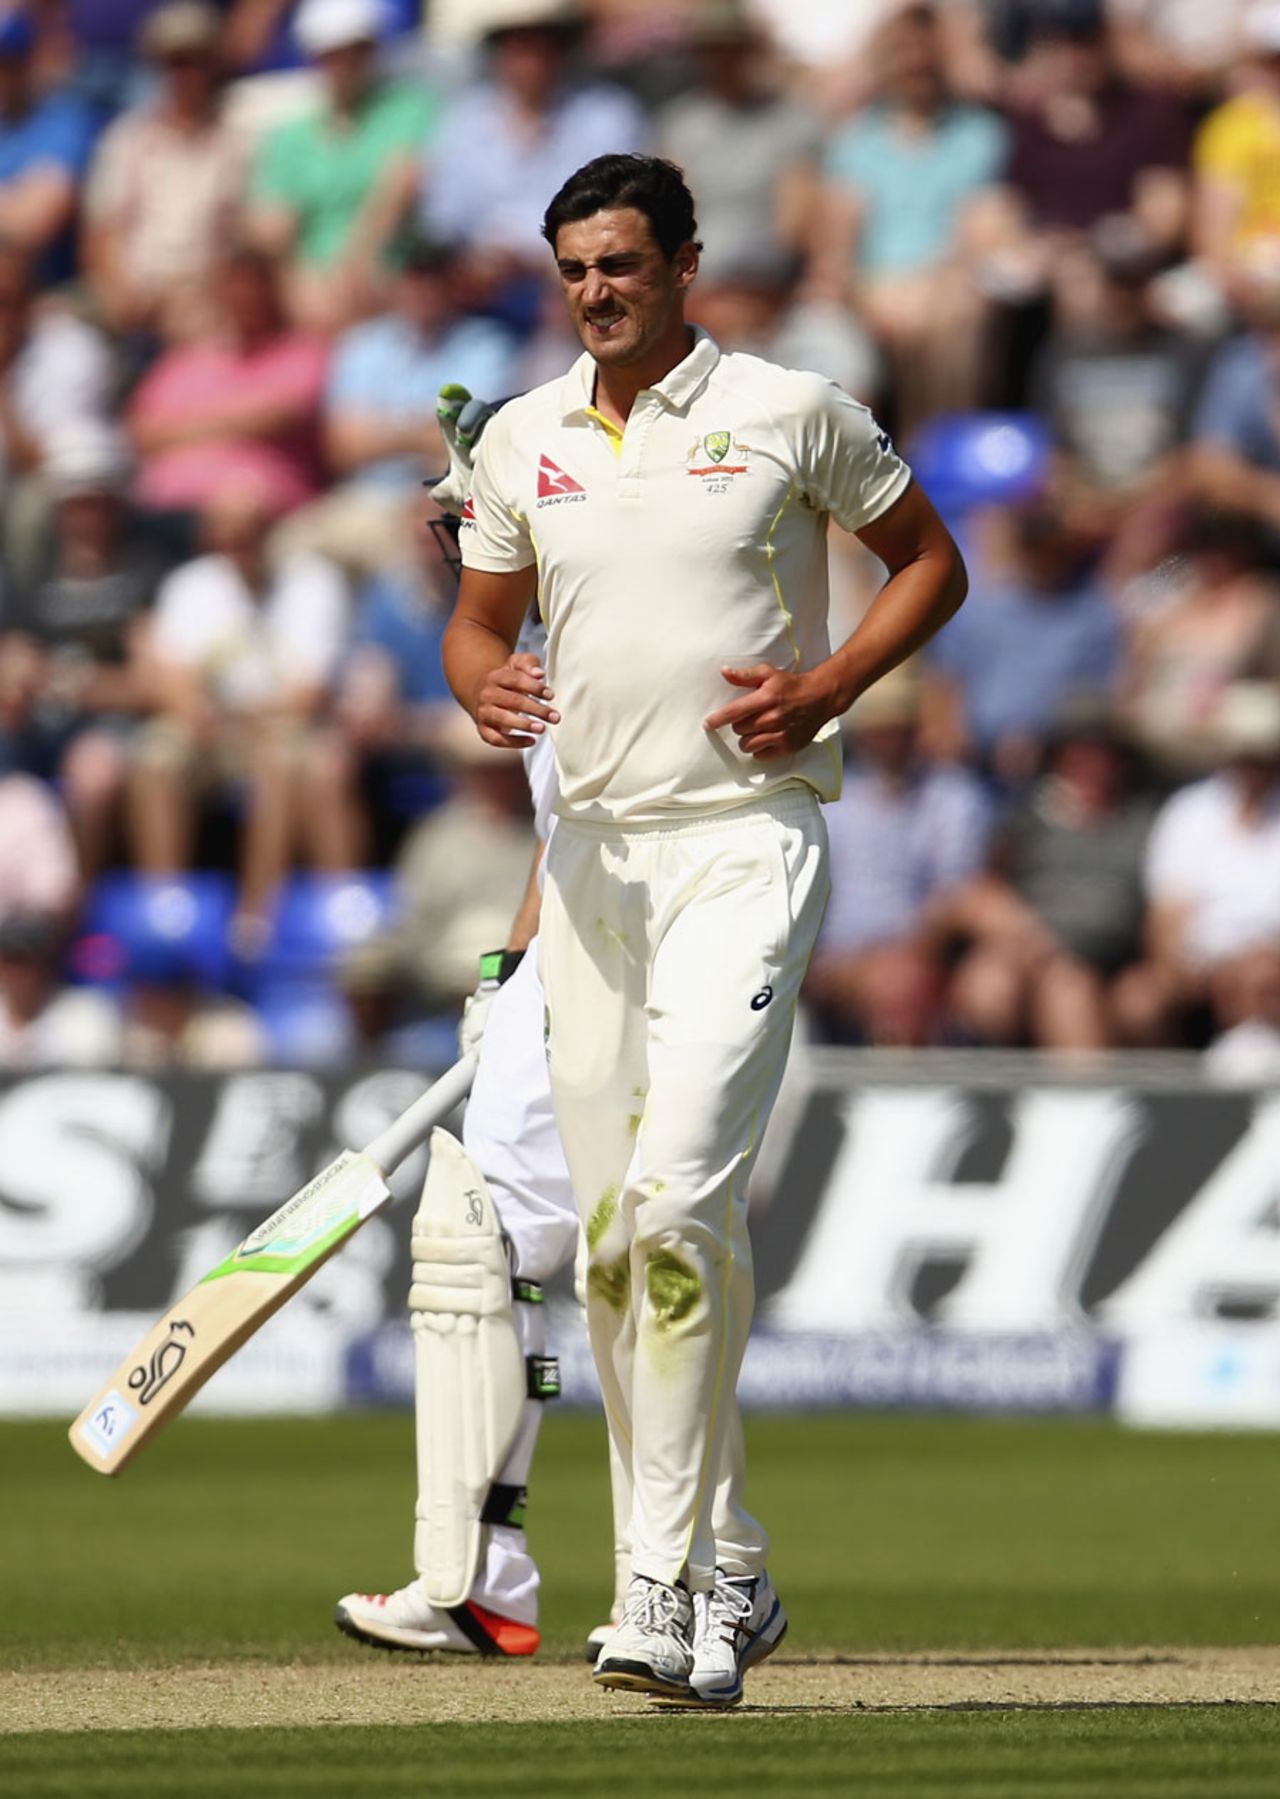 Mitchell Starc bowled through pain, England v Australia, 1st Investec Ashes Test, Cardiff, 3rd day, July 10, 2015